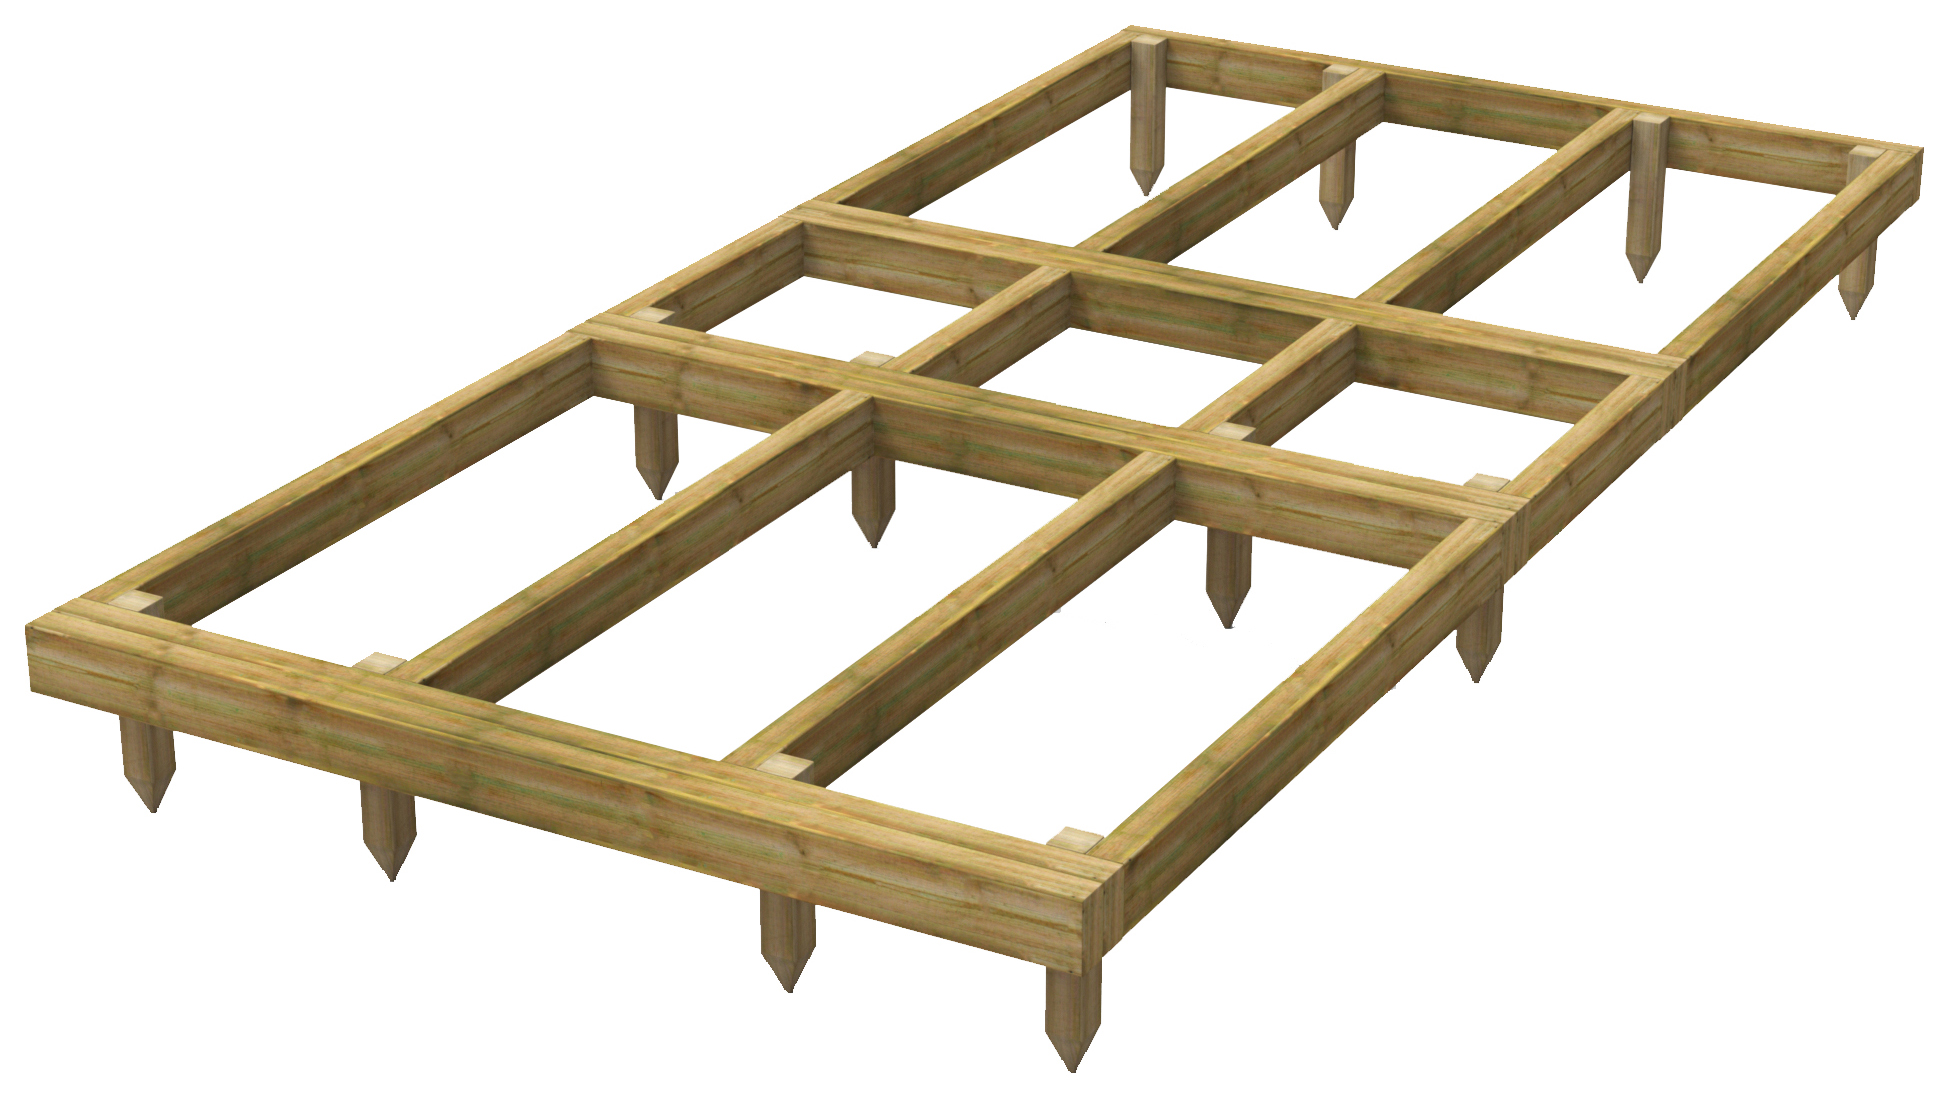 Power Sheds Pressure Treated Garden Building Base Kit - 10 x 5ft